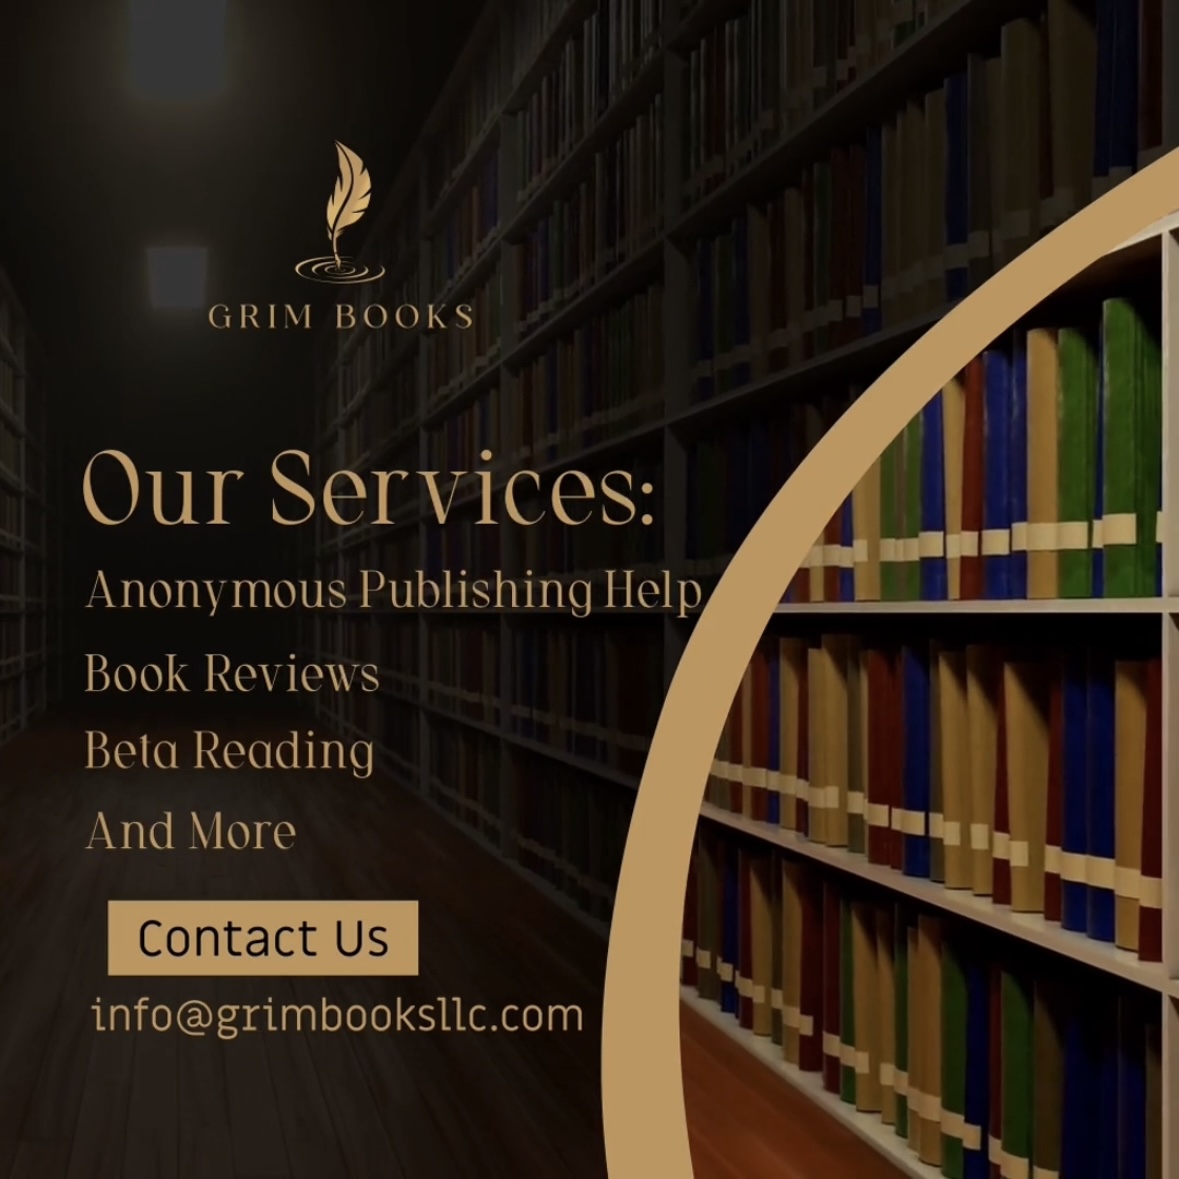 Get unbiased reviews for your masterpiece without burning a hole in your pocket – Grim Books LLC has you covered. 

#bookpublishing #anonymouspublishing #betareading #writingcommunity #authors #writers #bookreviews #indieauthors